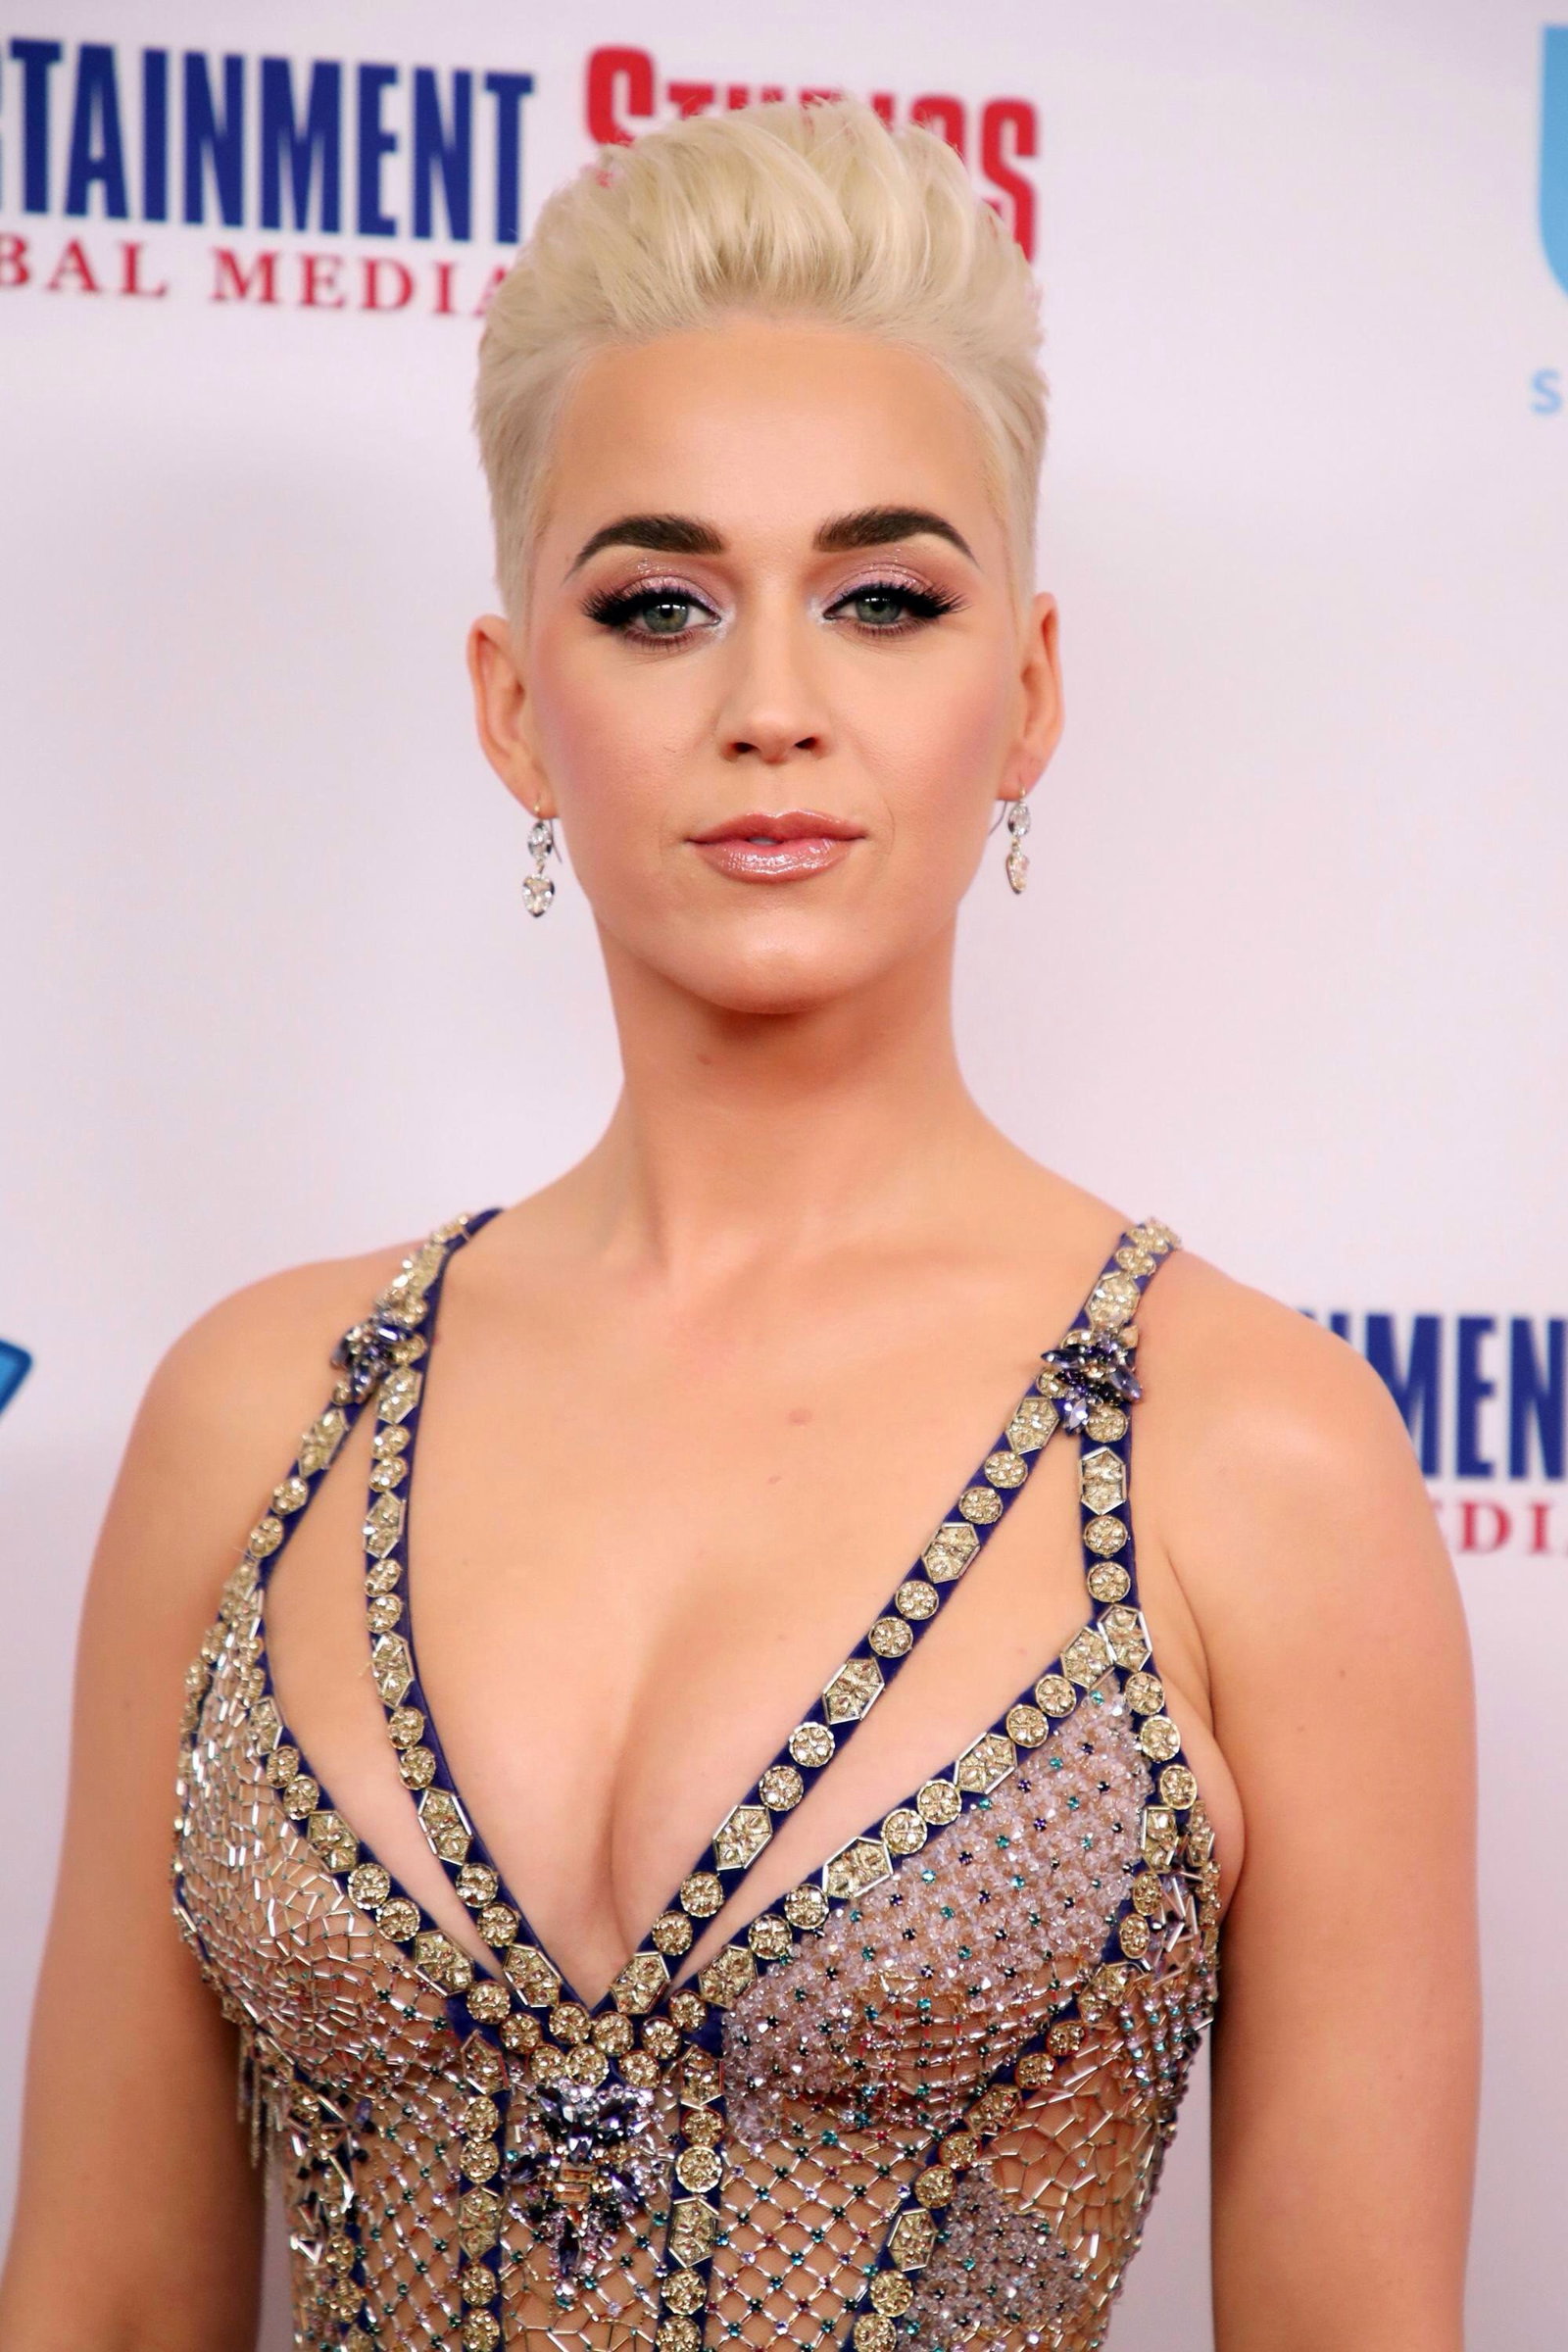 Photo by undefined with the username @undefined,  December 7, 2020 at 11:03 AM. The post is about the topic MILF and the text says 'Katy Perry'